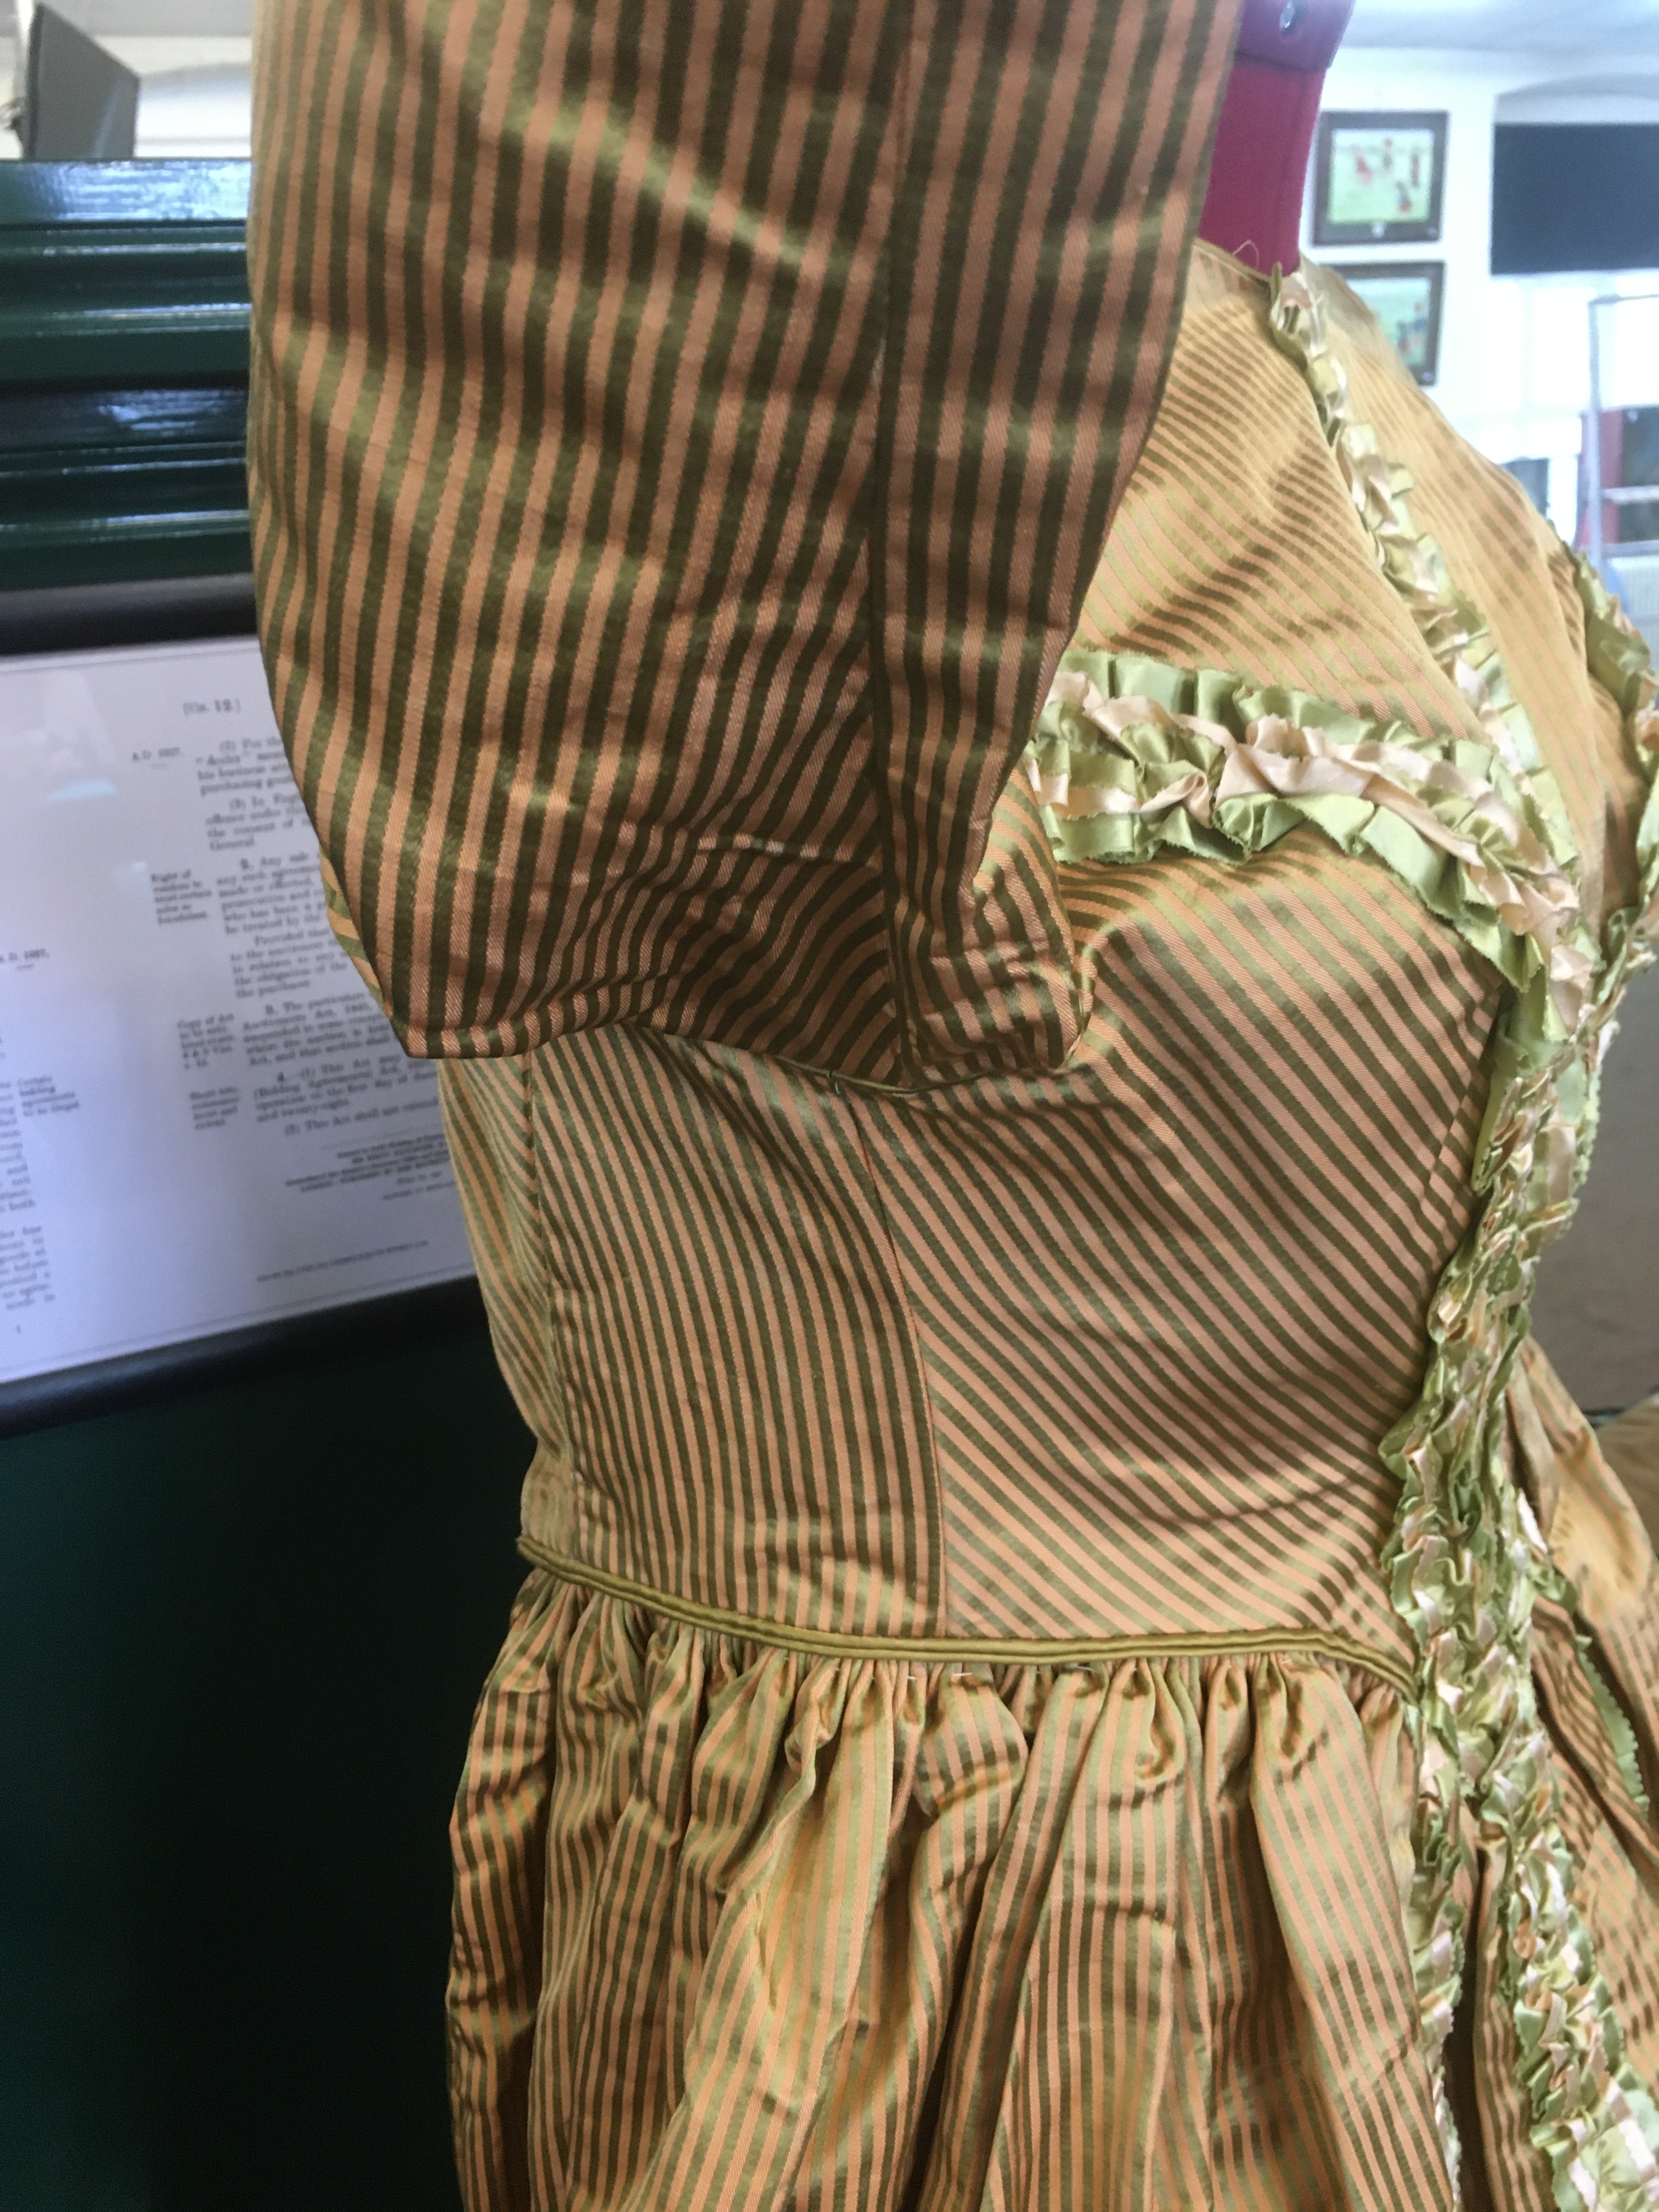 19THC SILK LADIES DRESS a mid 19thc apricot and olive green striped silk dress, decorated with - Image 3 of 9